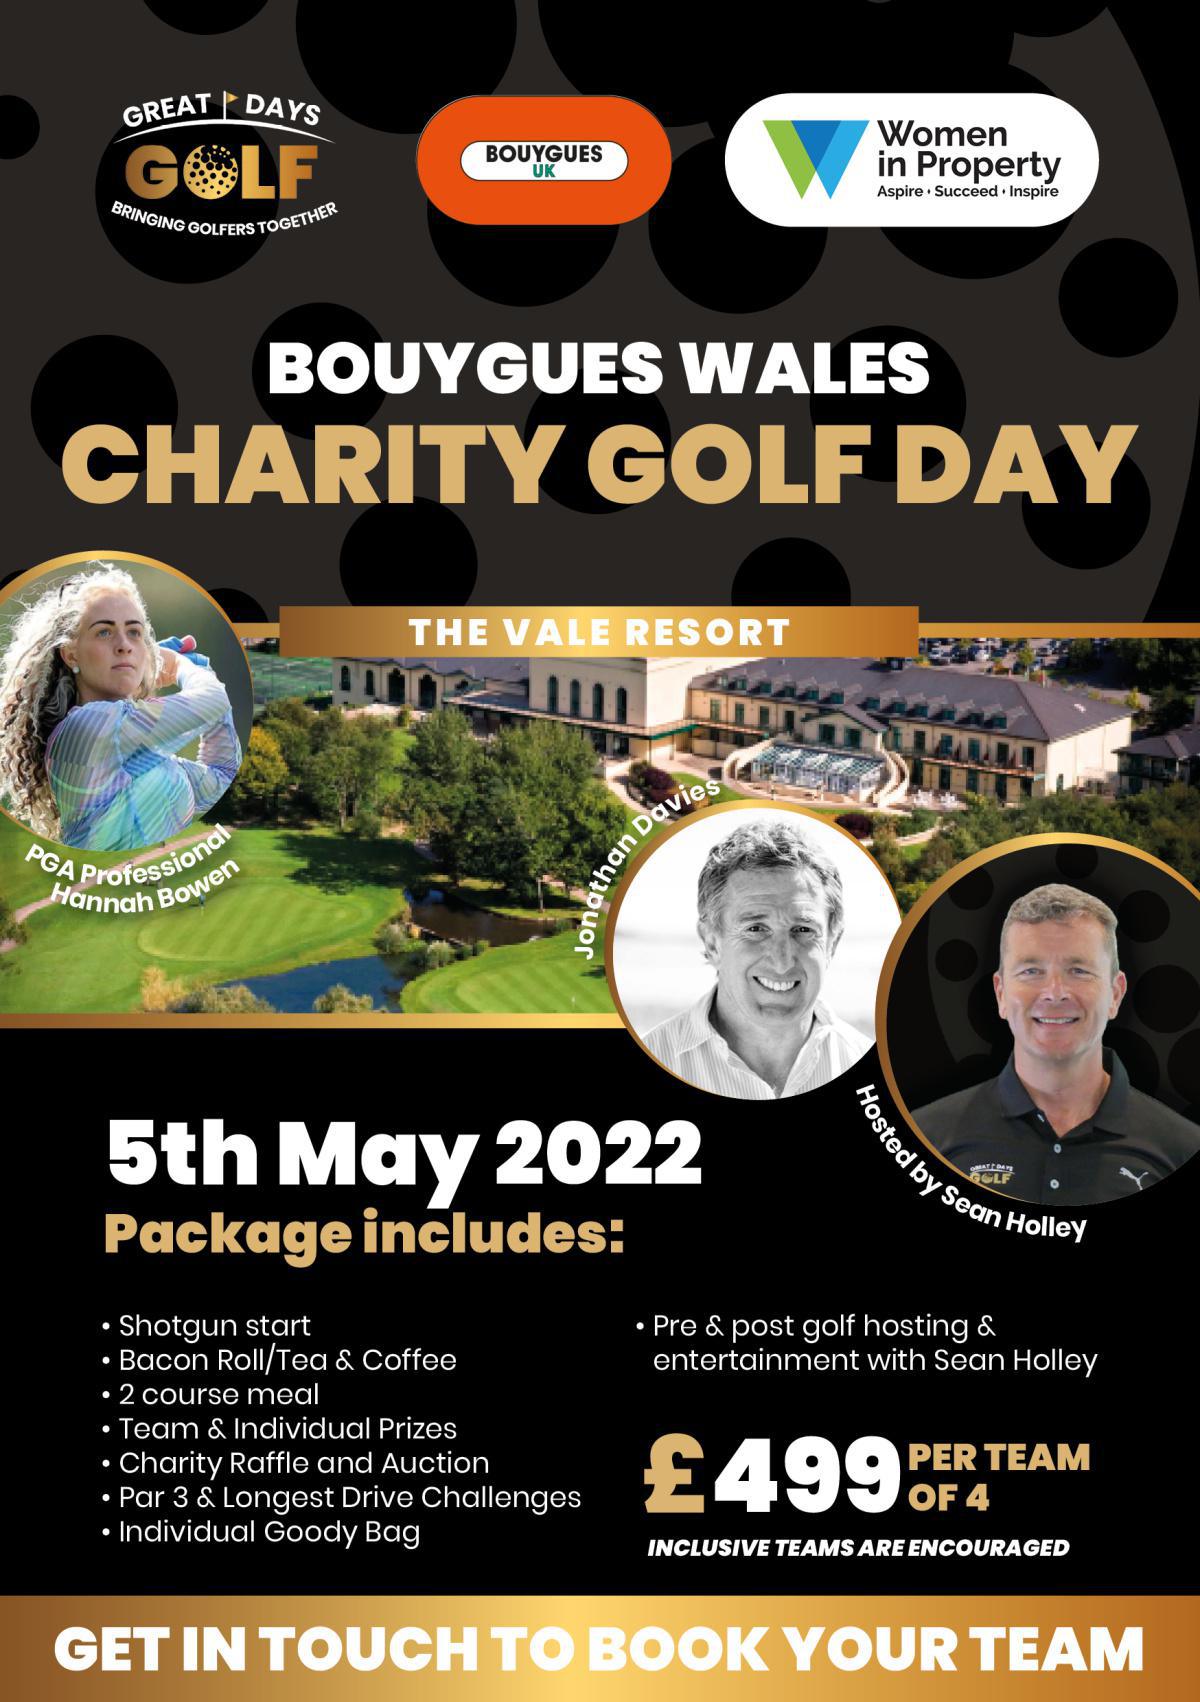 GDG Teams Up With Construction Giants Bouygues UK For Inaugural Charity Golf Day